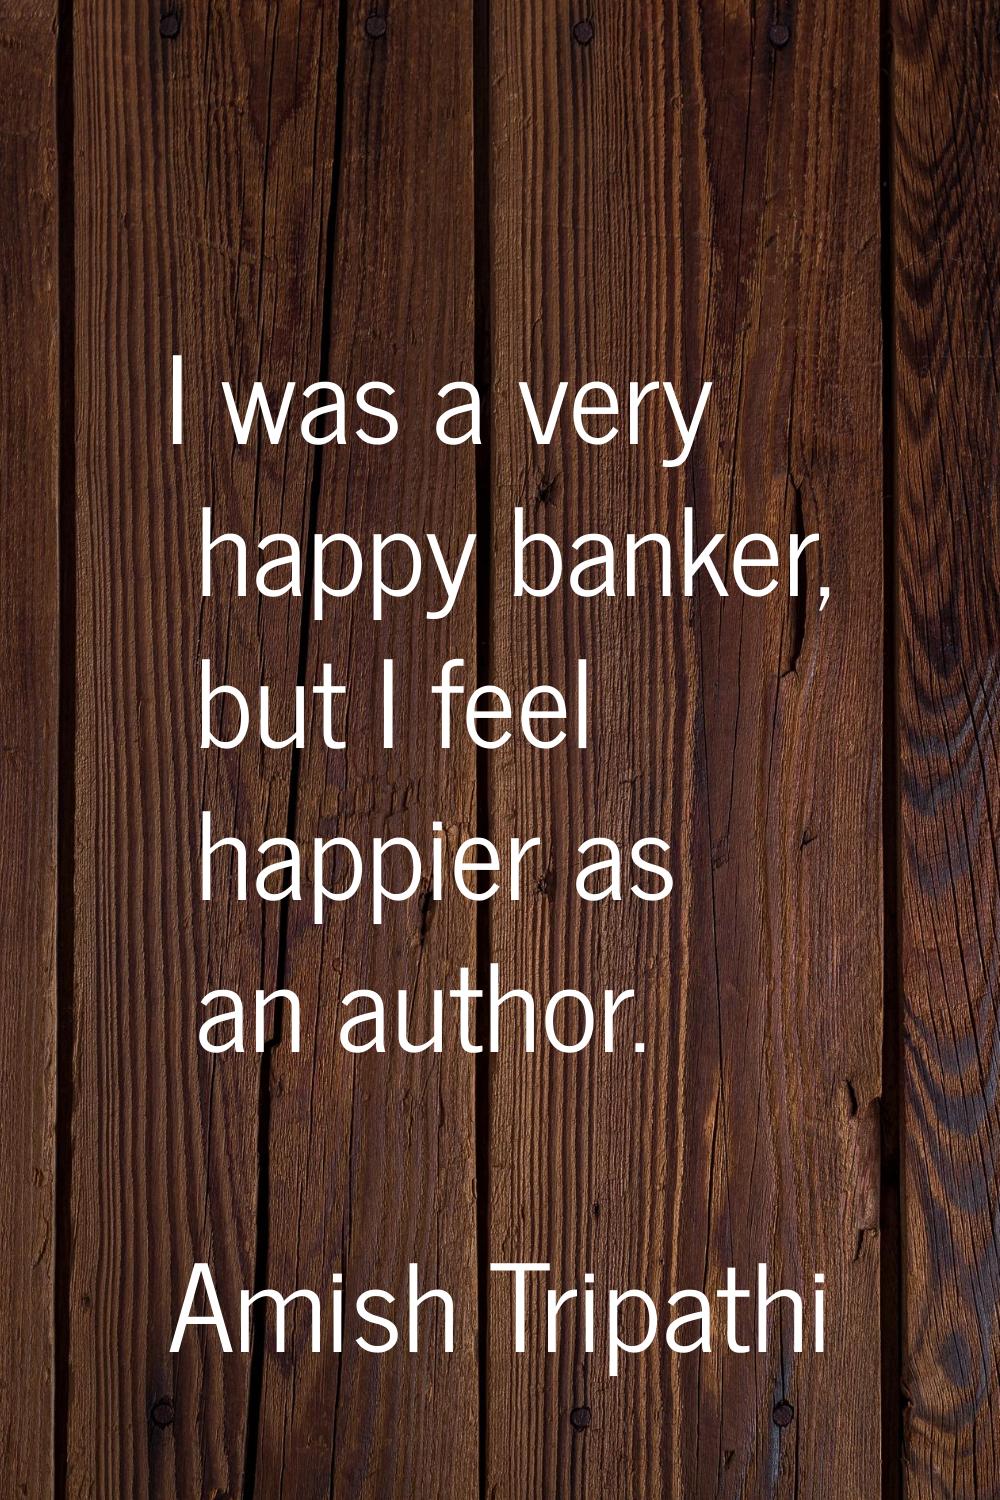 I was a very happy banker, but I feel happier as an author.